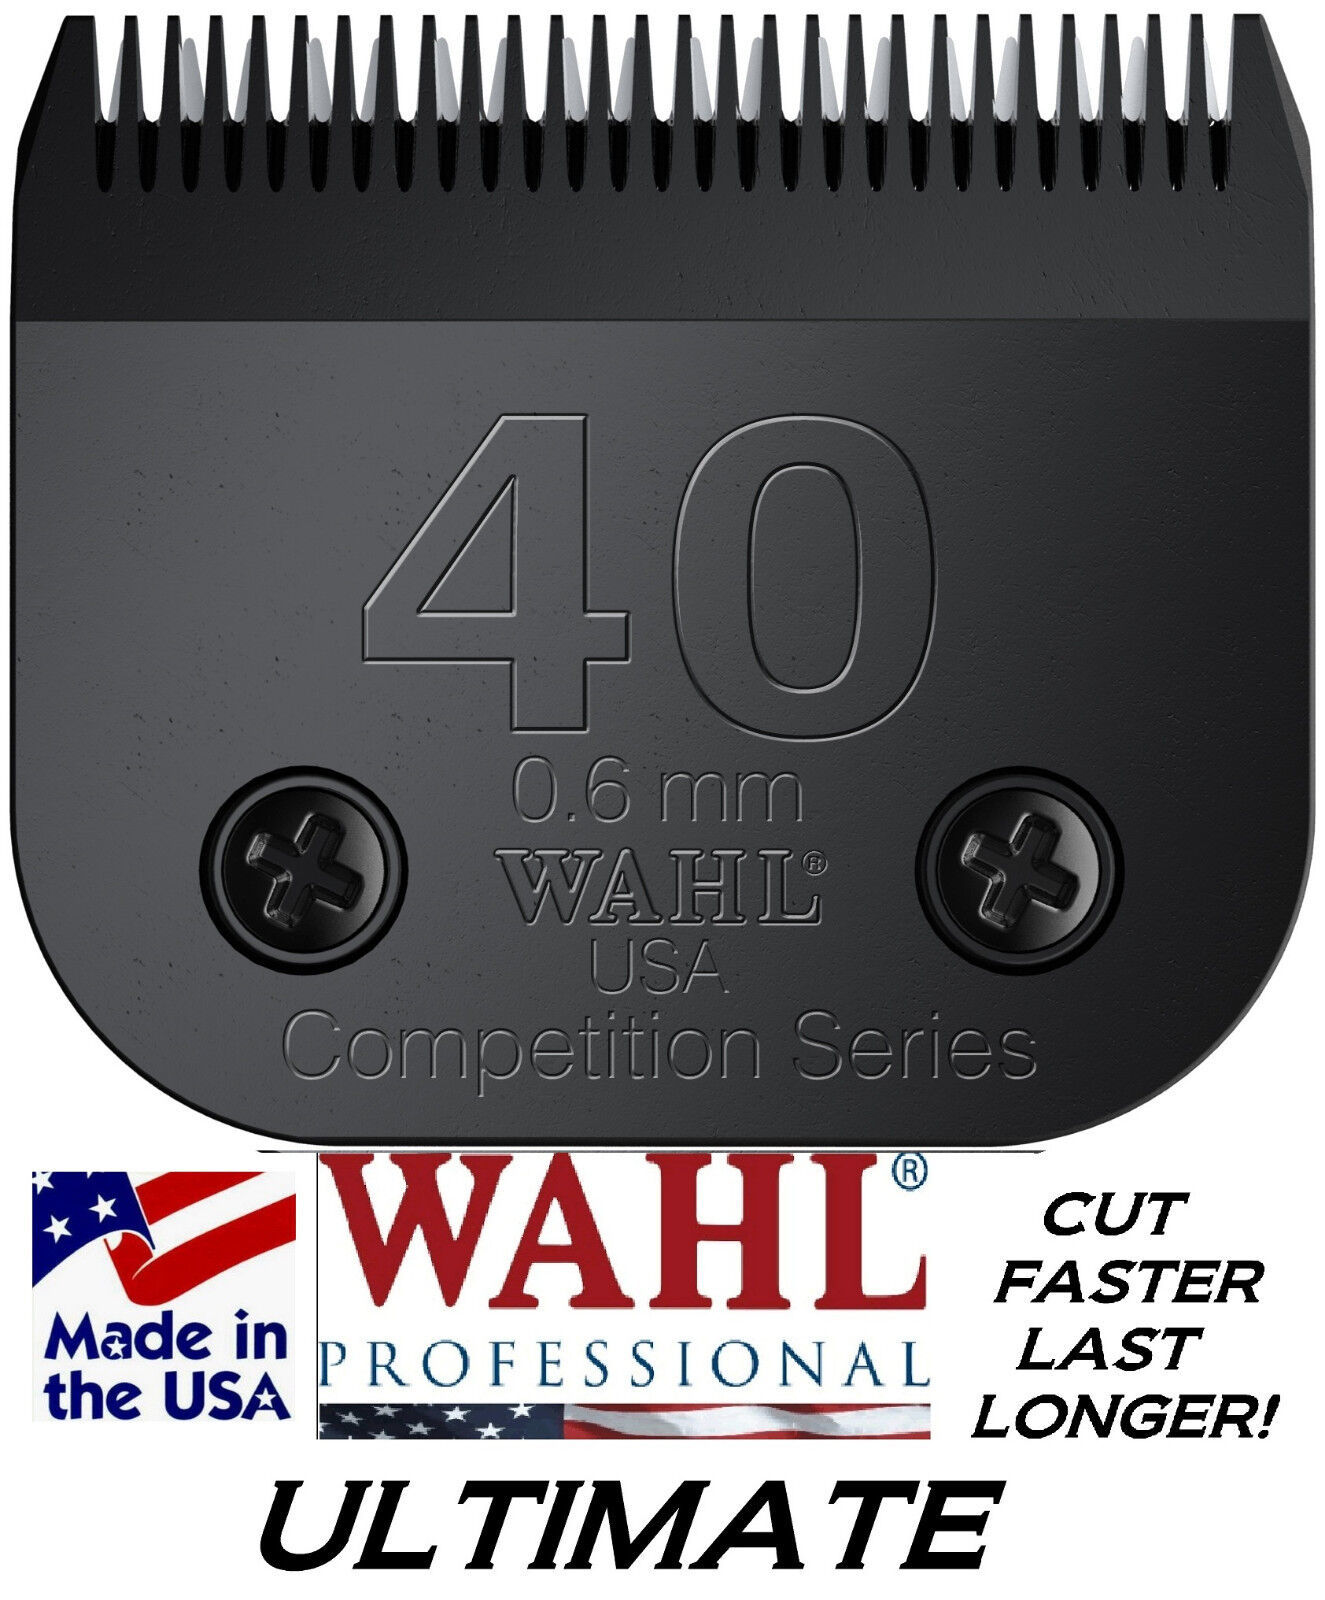 Primary image for WAHL ULTIMATE COMPETITION Pet Grooming # 40 BLADE 6mm*Fit Oster A5 A6 Clippers